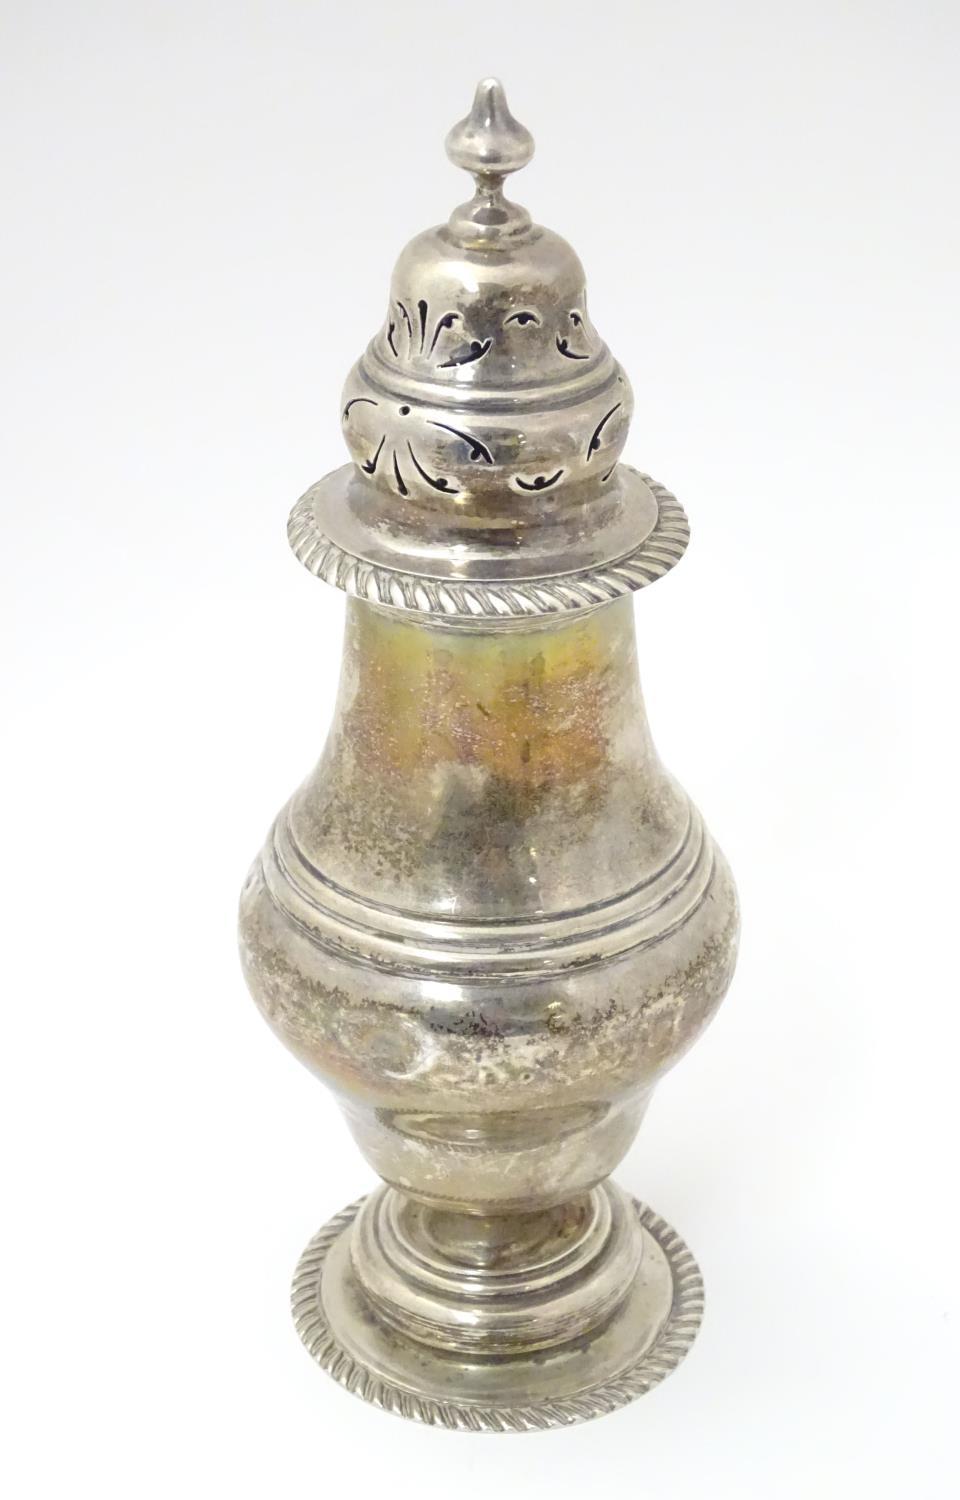 A silver caster / muffineer hallmarked London 1908 maker Mappin & Web Ltd. 8 1/2"high Please - Image 4 of 6